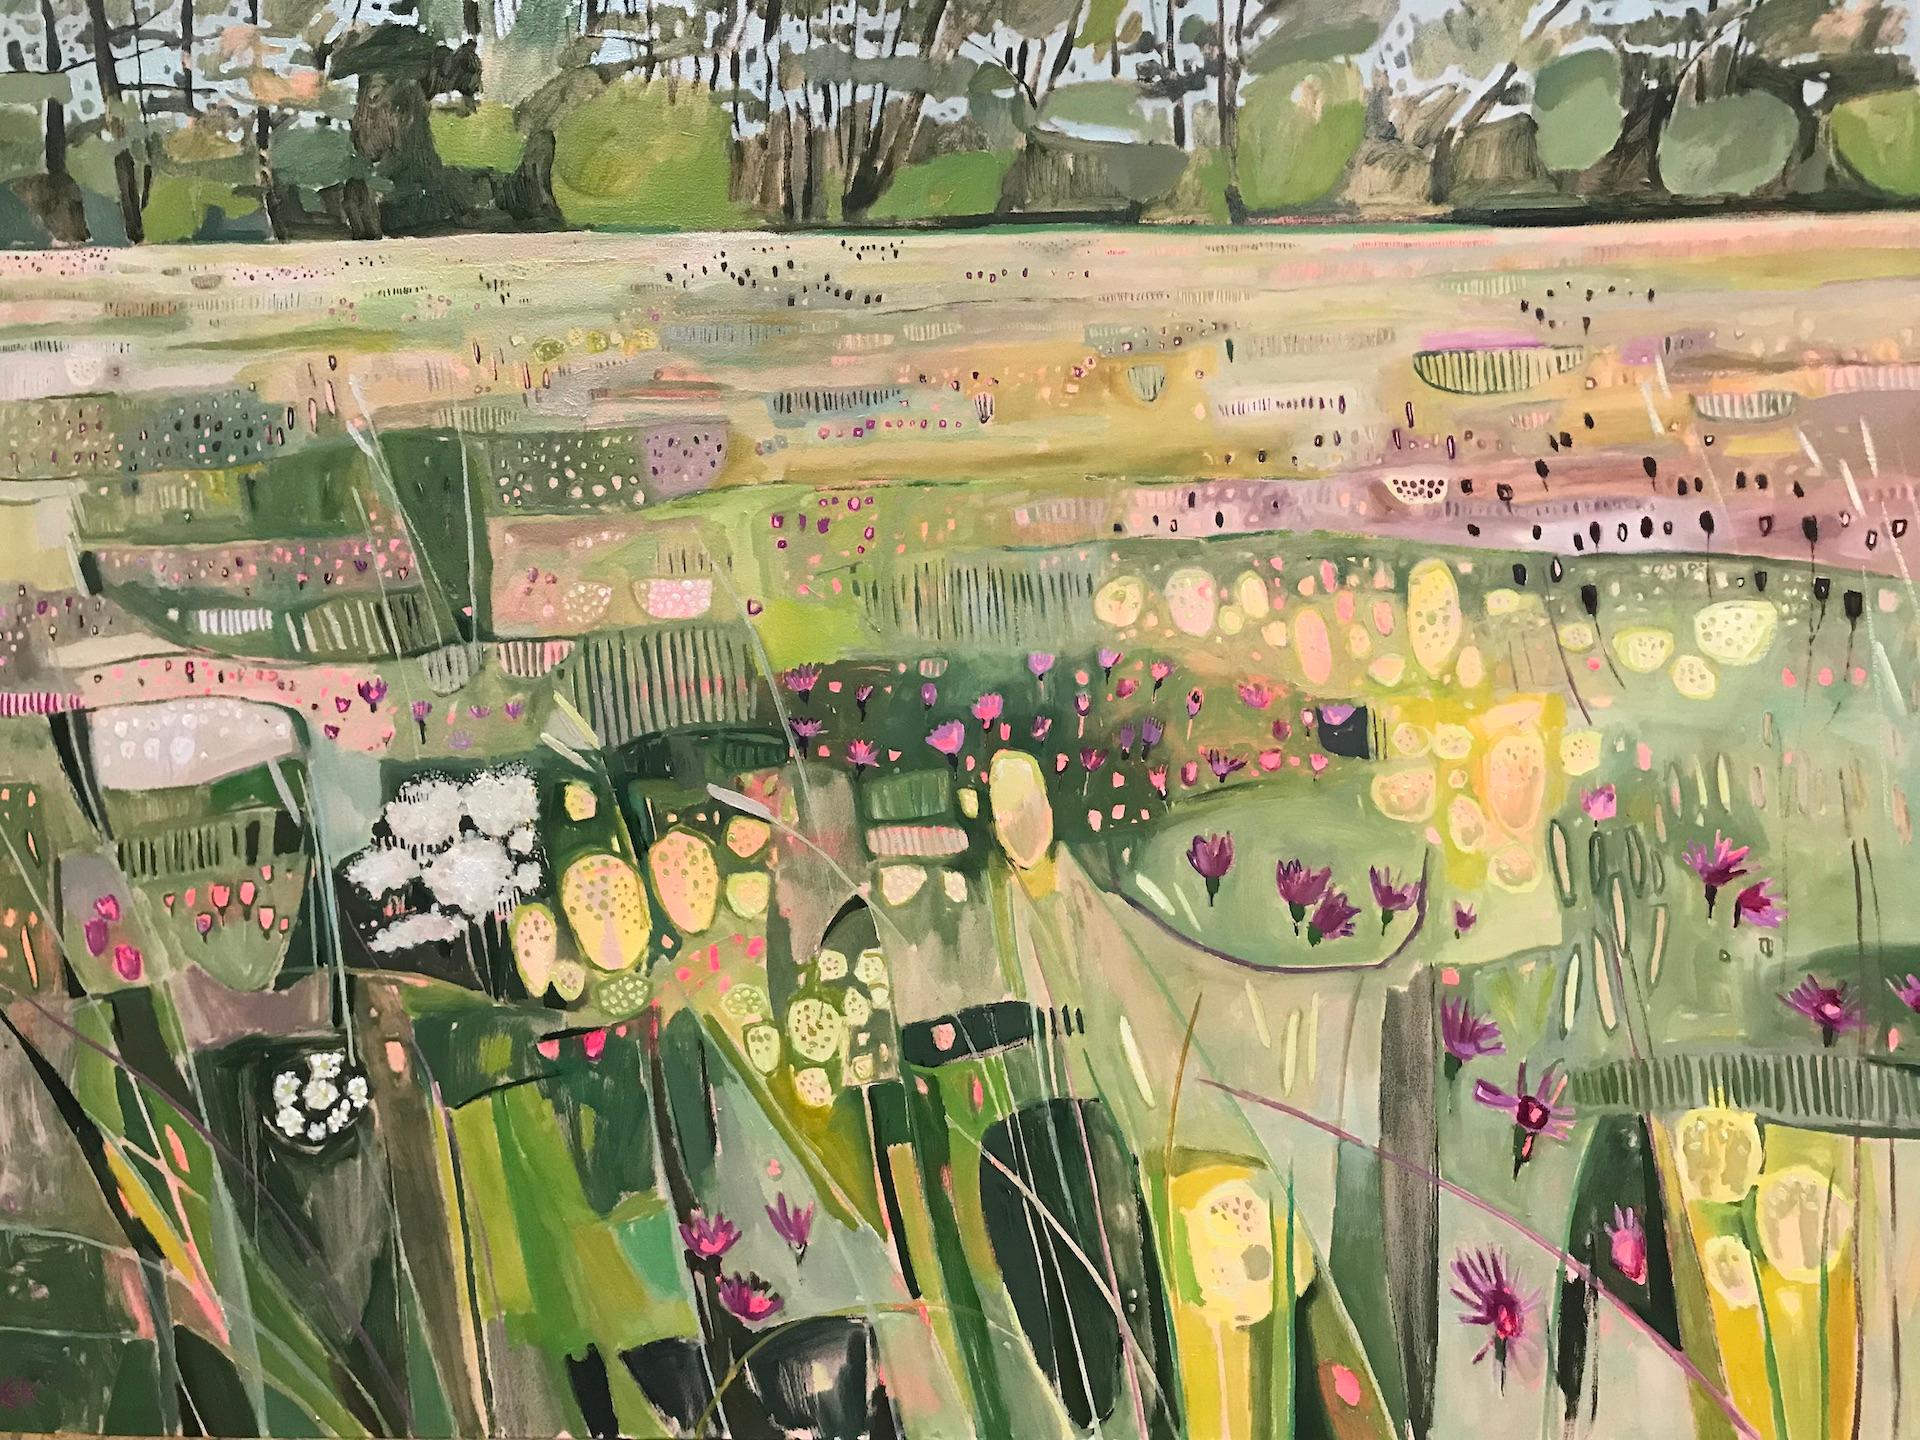 Hinksey Meadows Landscape [2022]
original and hand signed by the artist 

oil and acrylic on canvas

Image size: H:120 cm x W:160 cm

Complete Size of Unframed Work: H:120 cm x W:160 cm x D:3.5cm

Sold Unframed

Please note that insitu images are